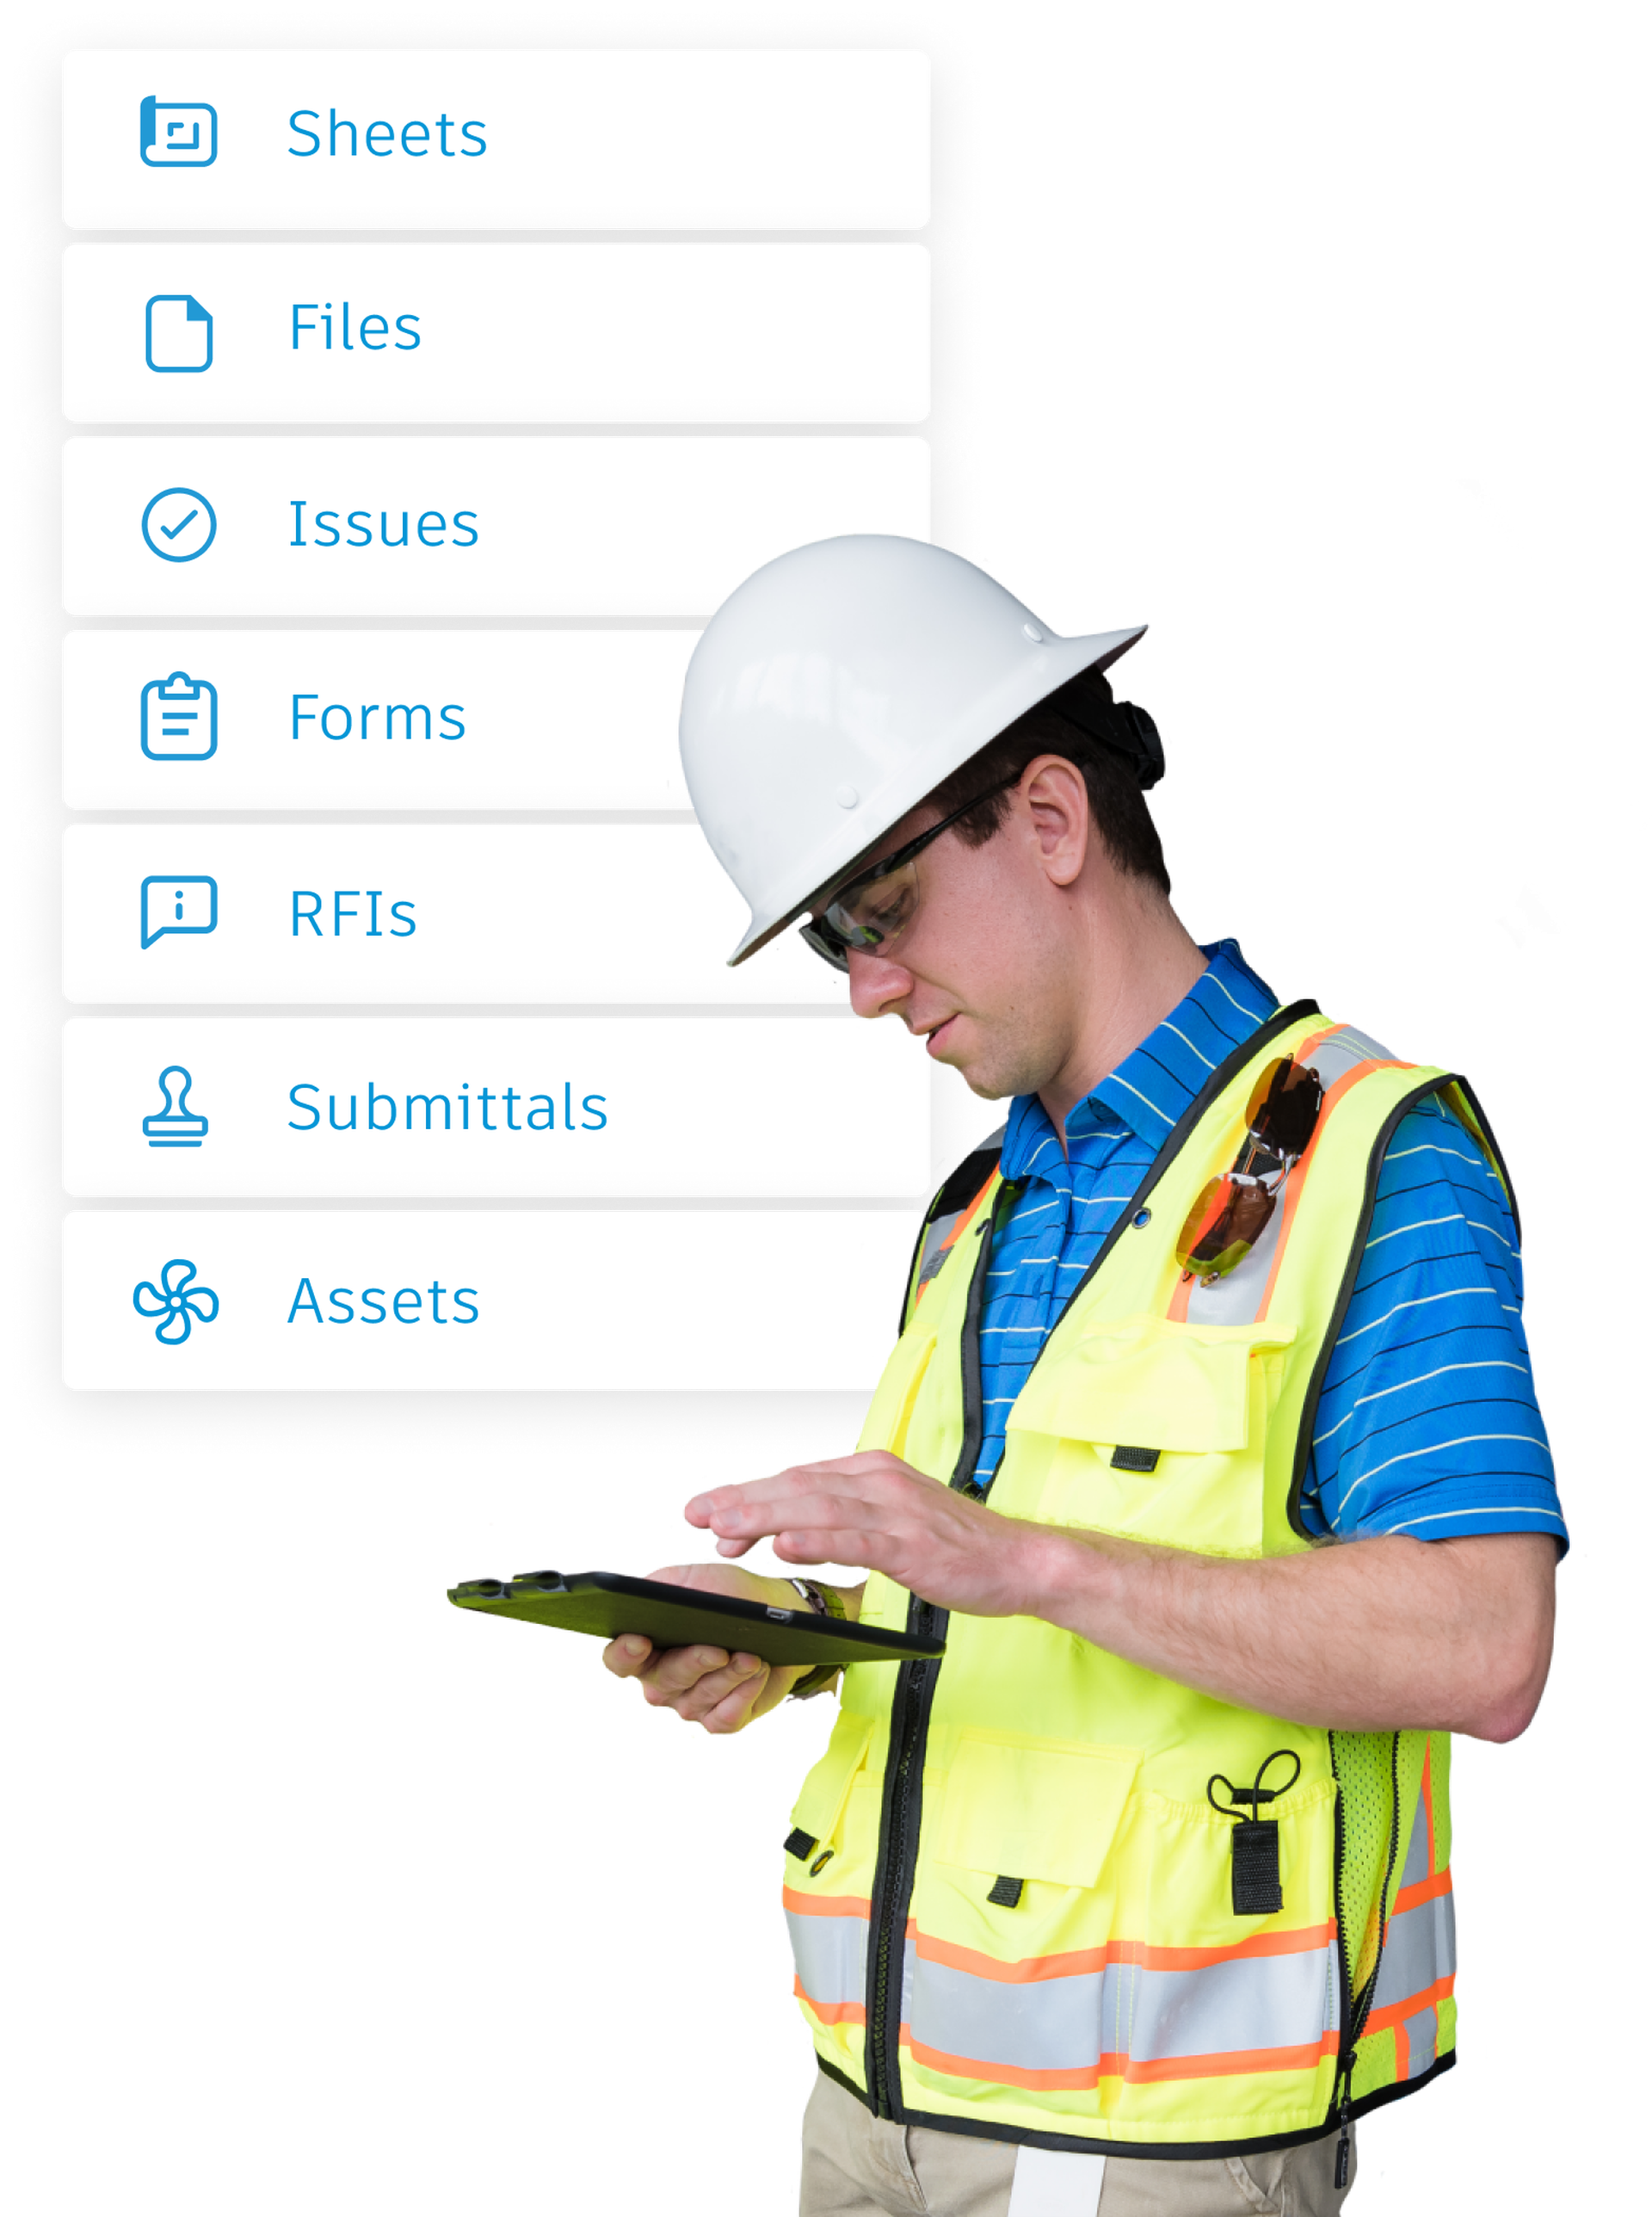 Construction worker accessing project data on a remote jobsite